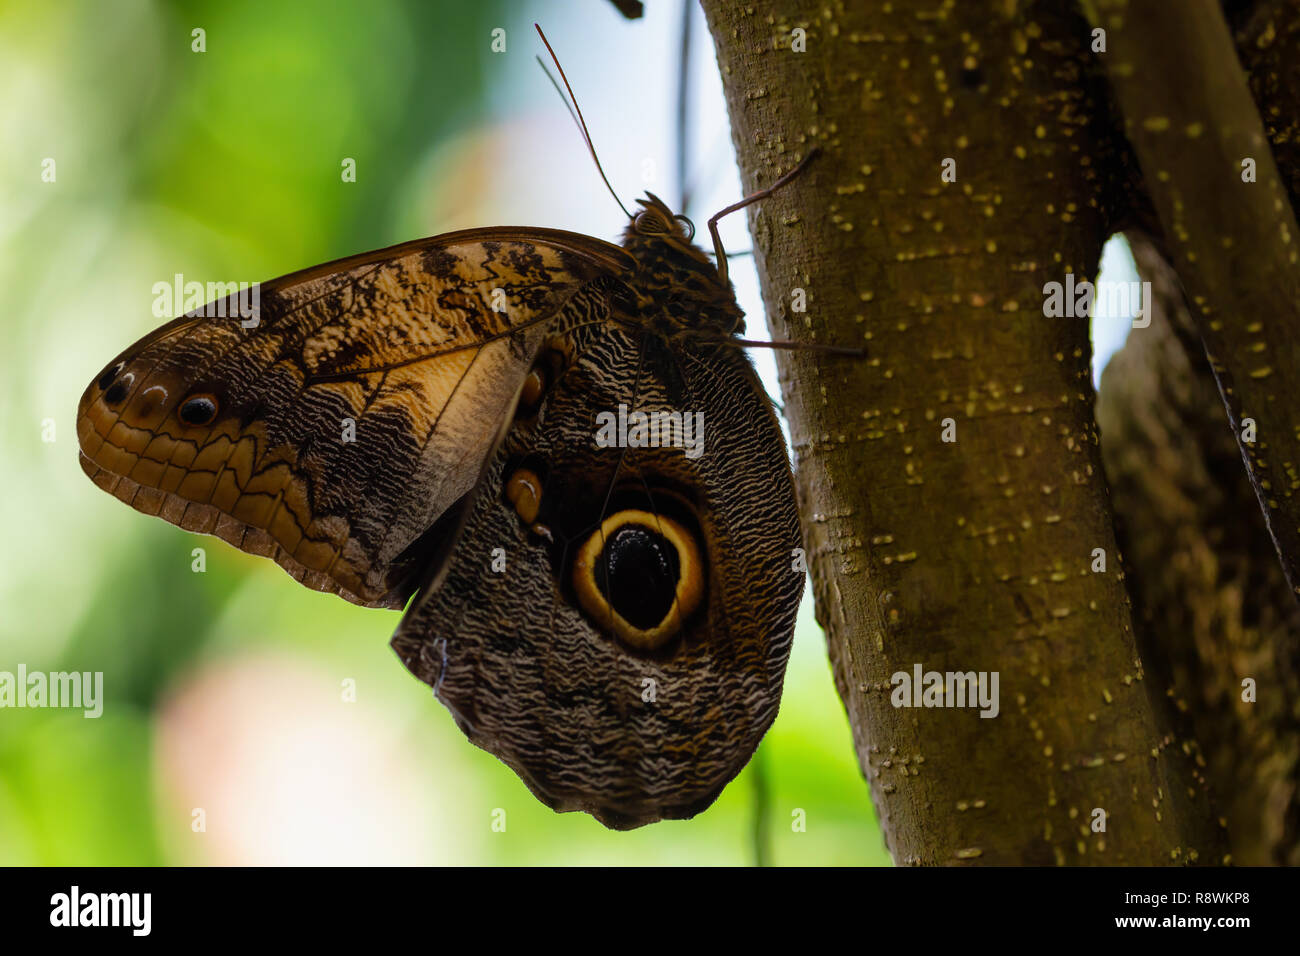 Beautiful macro picture of a butterfly, Caligo memnon, also knowed as the Giant Owl. Place of Origin is Costa Rica, Central American. Stock Photo